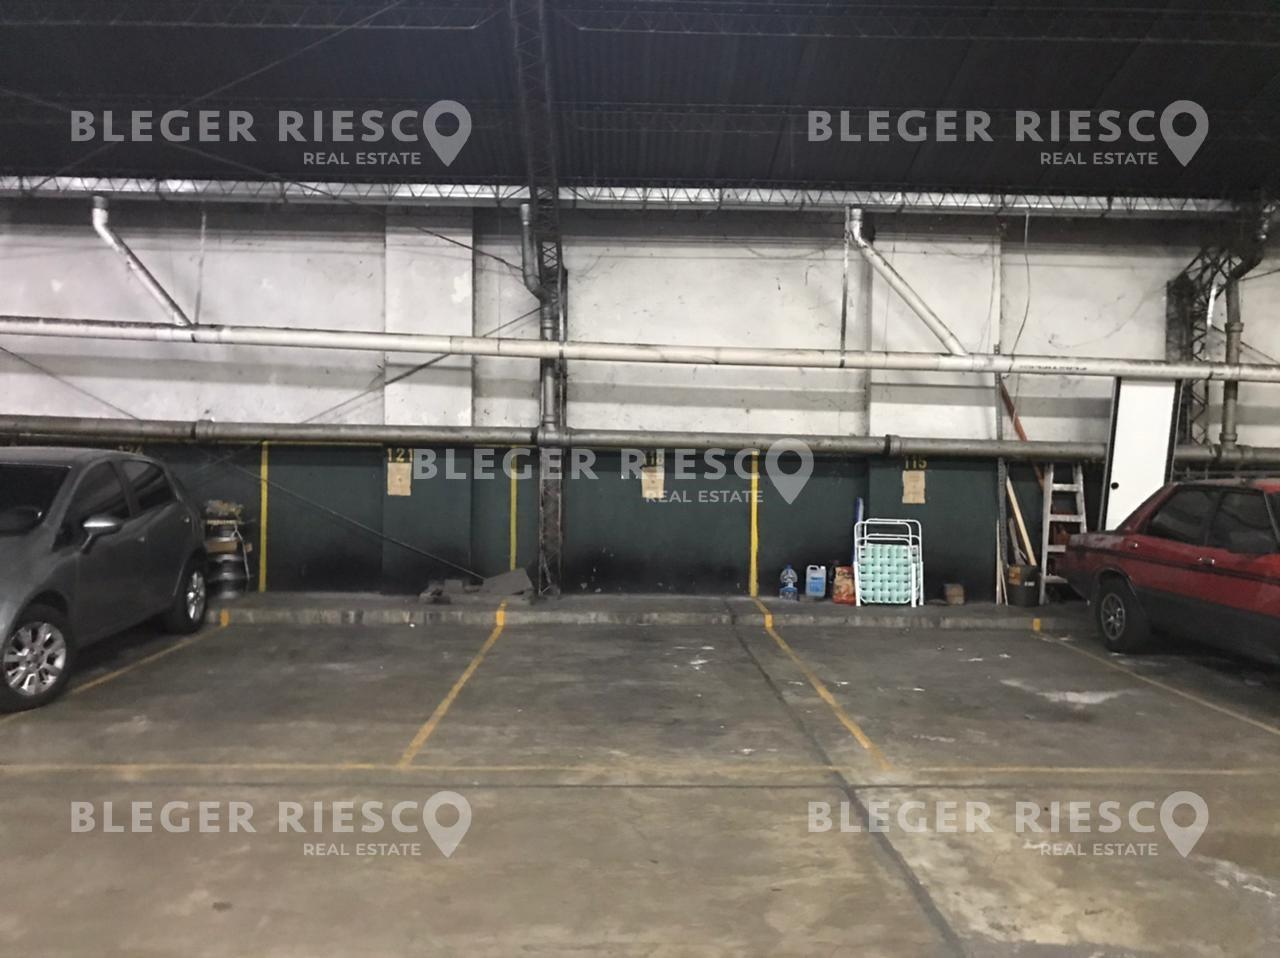 #2535631 | Sale | Garage | Capital Federal (Bleger-Riesco Real State)